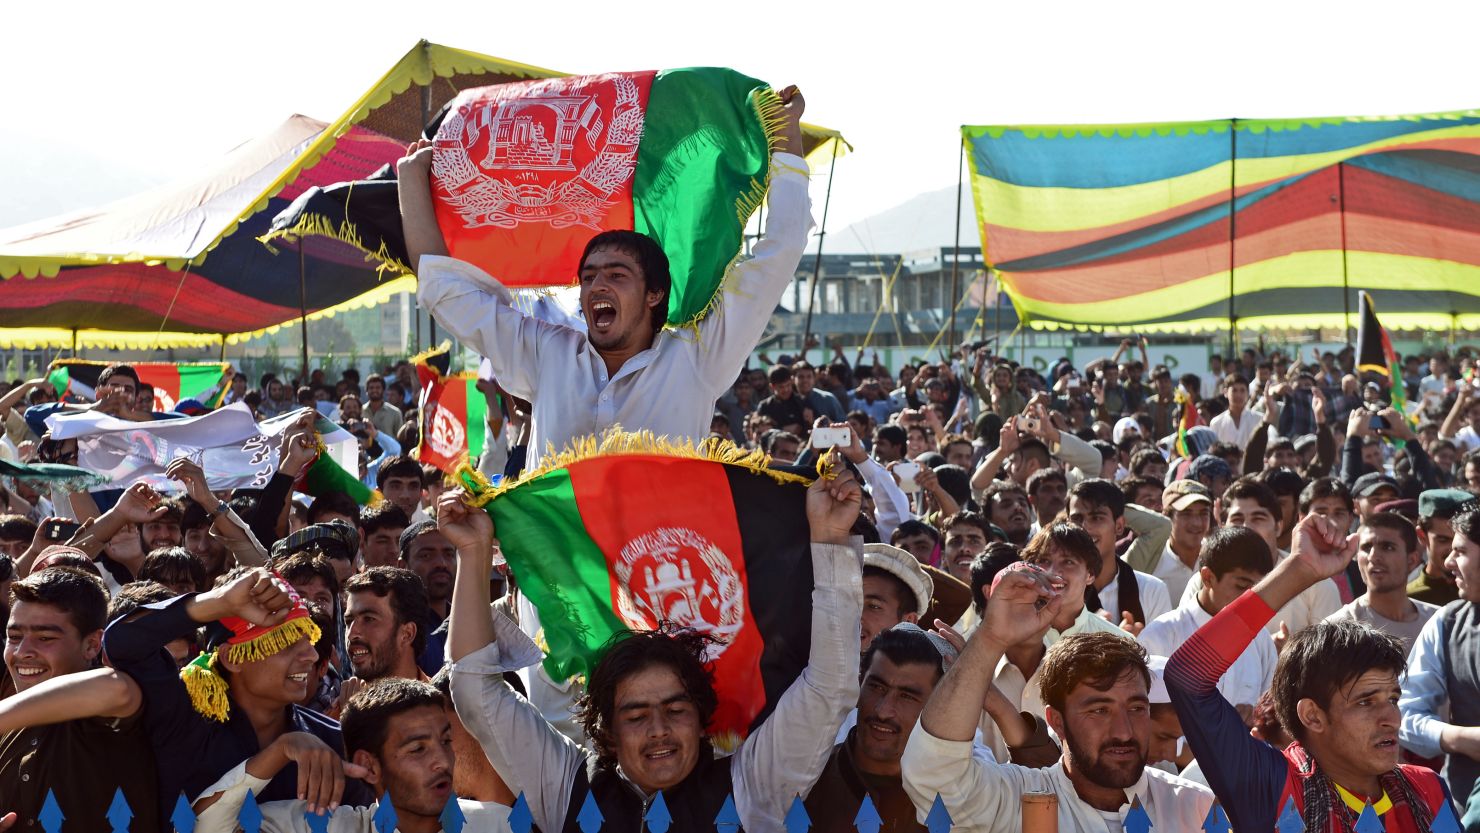 Afghan cricket fans packed into Kabul's International Cricket Stadium on October 4 to watch the win over Kenya on big screens.